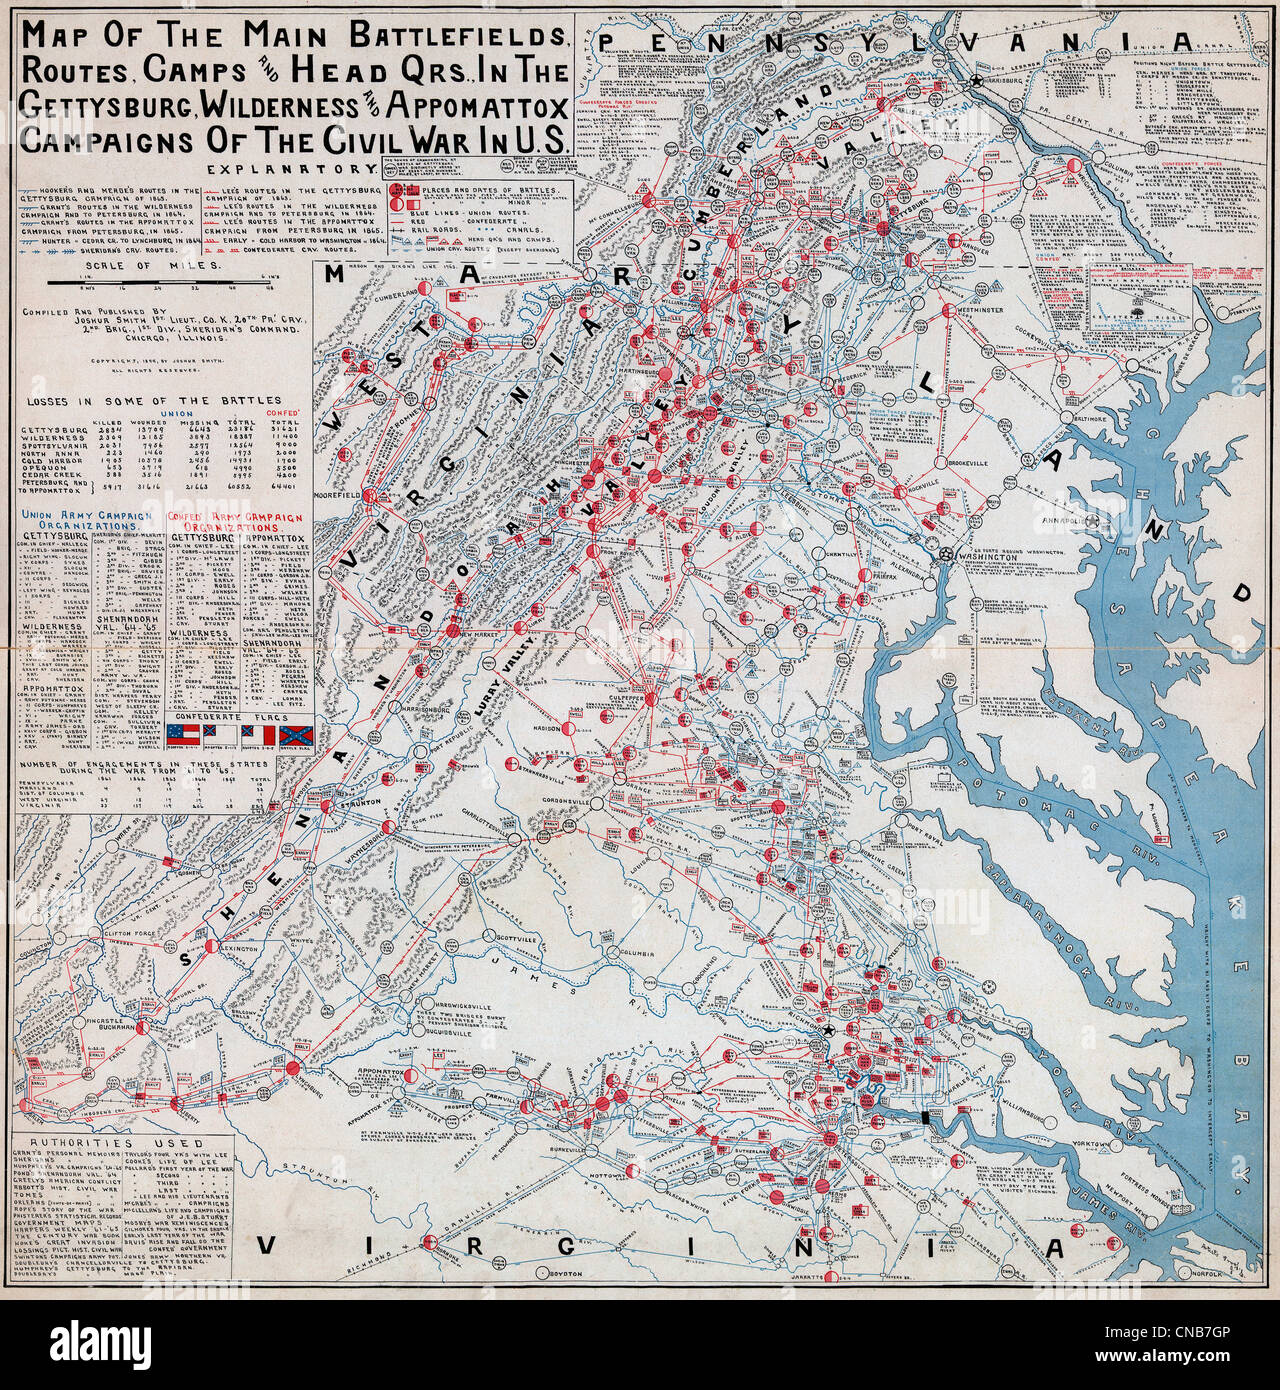 Map of the main battlefields, routes, camps and head qrs., in the Gettysburg, Wilderness and Appomattox campaigns of the Civil War in U.S Stock Photo